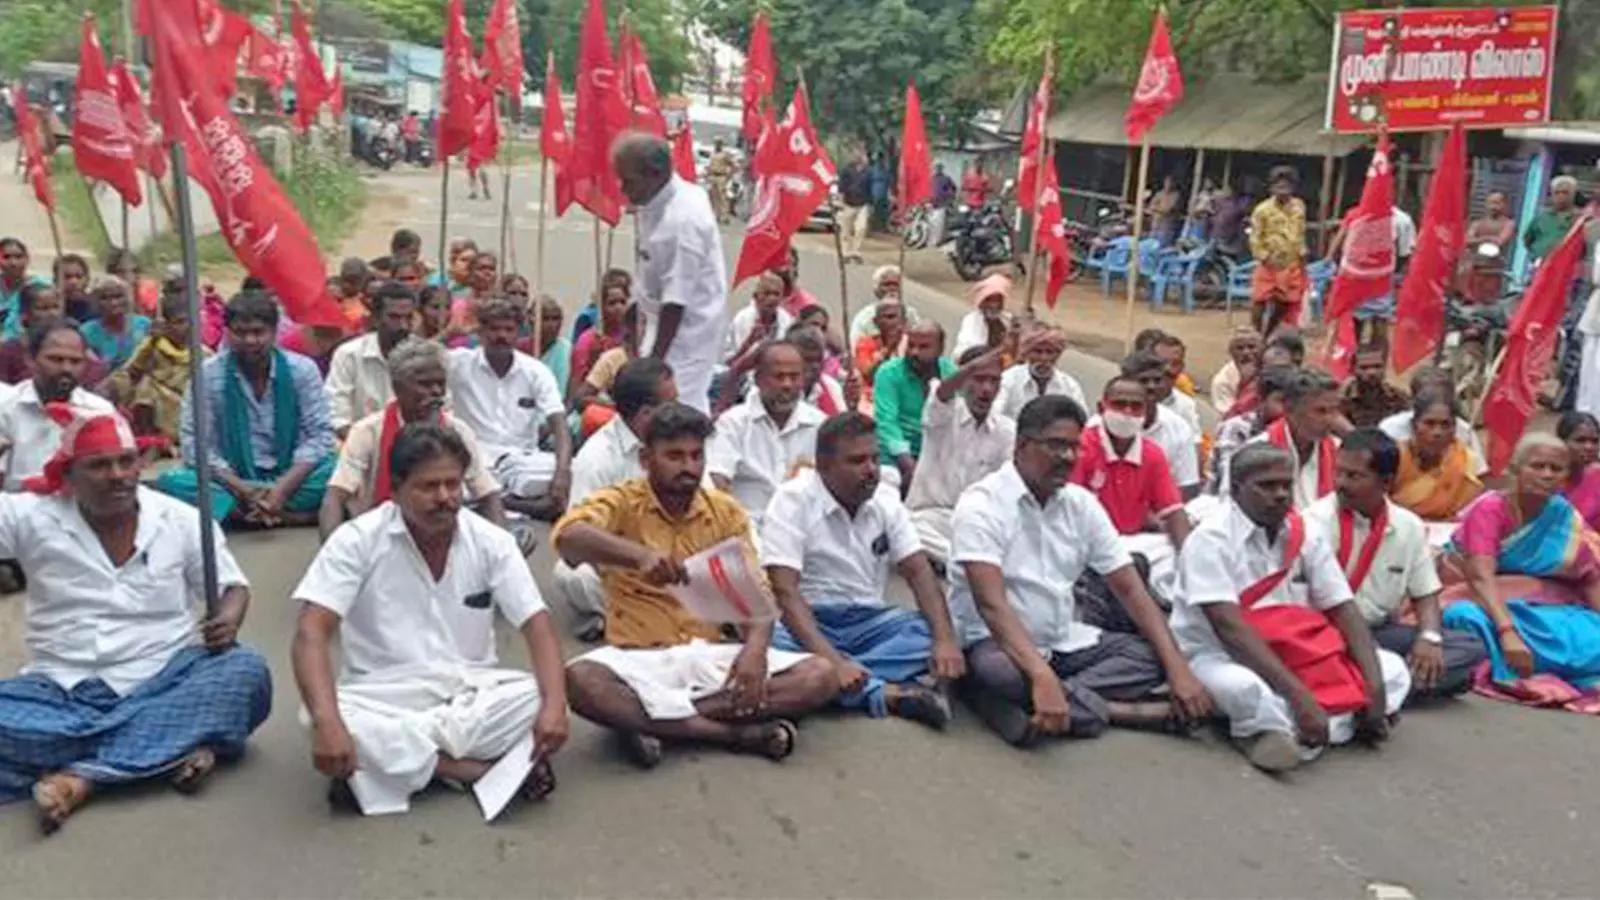 Members of CPI during a protest discrimination against Dalits.